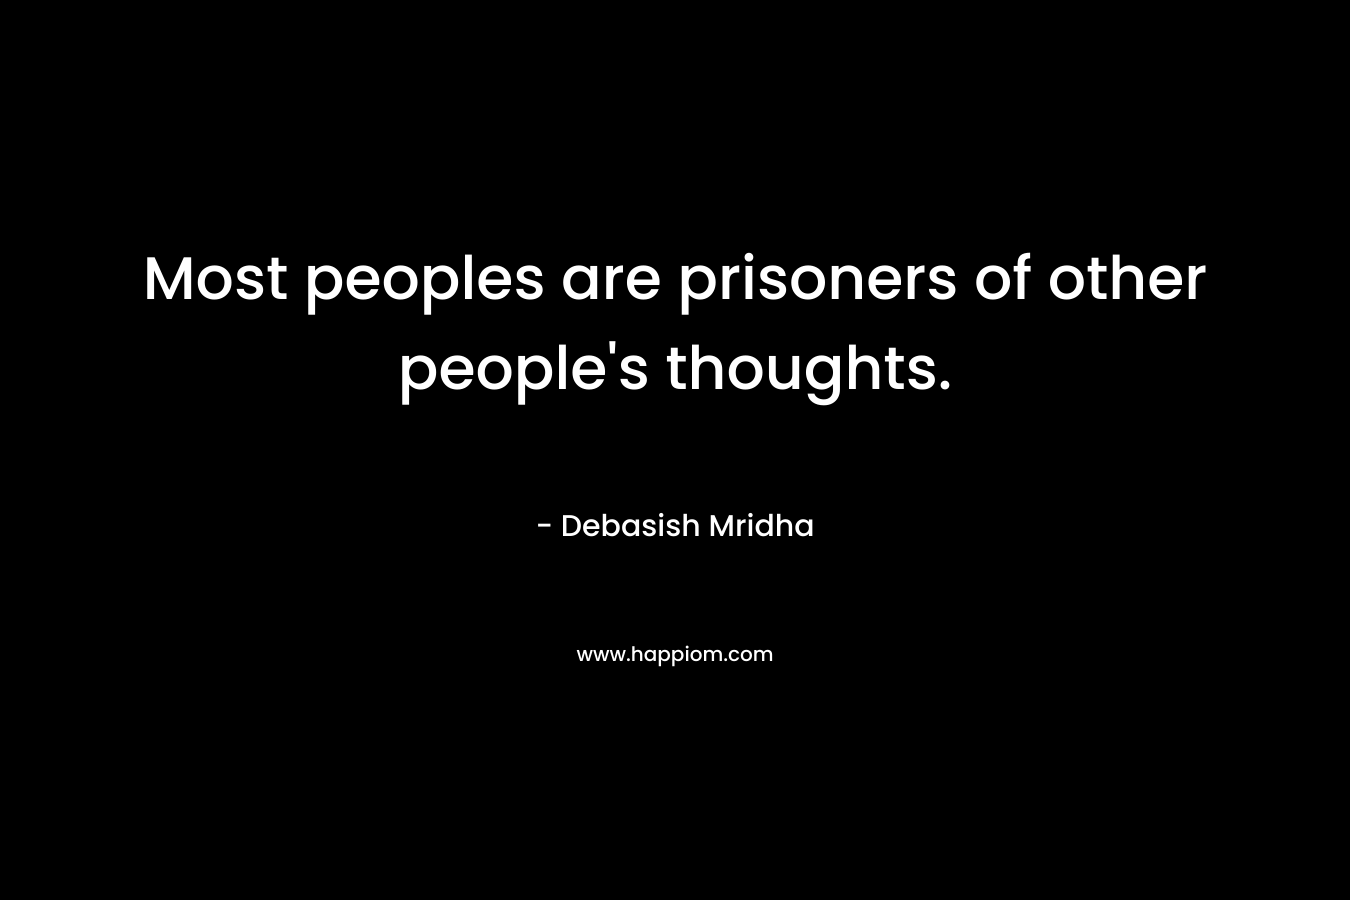 Most peoples are prisoners of other people's thoughts.